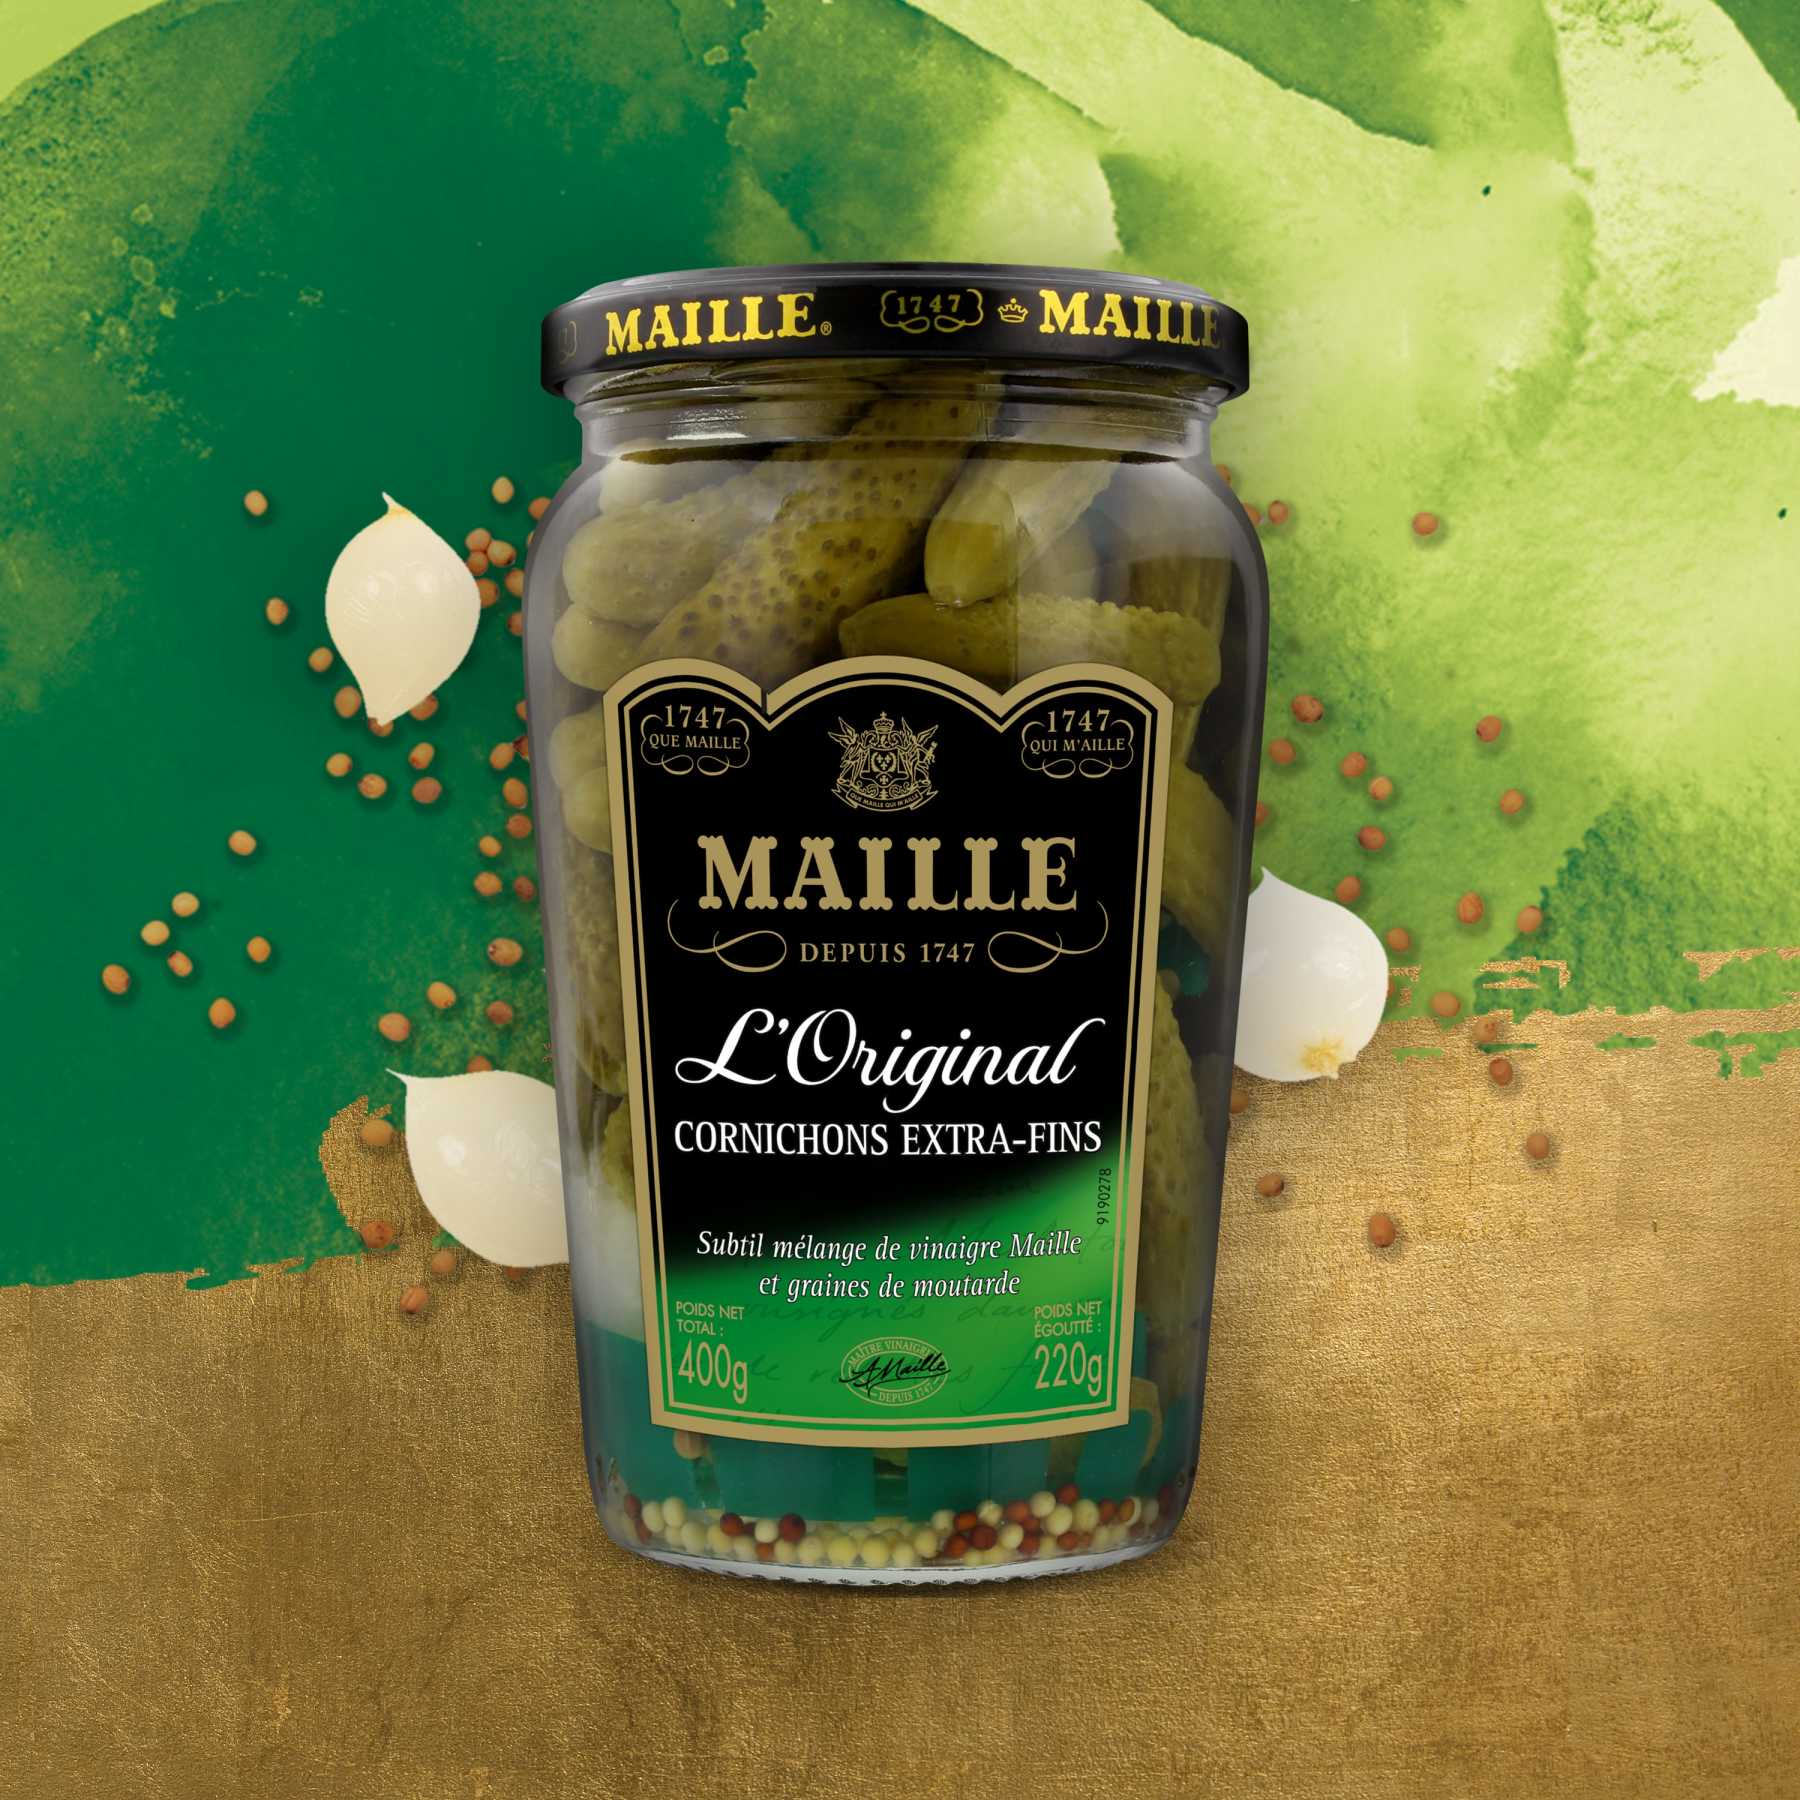 Maille Cornichons Extra-Fins Bocal 950g